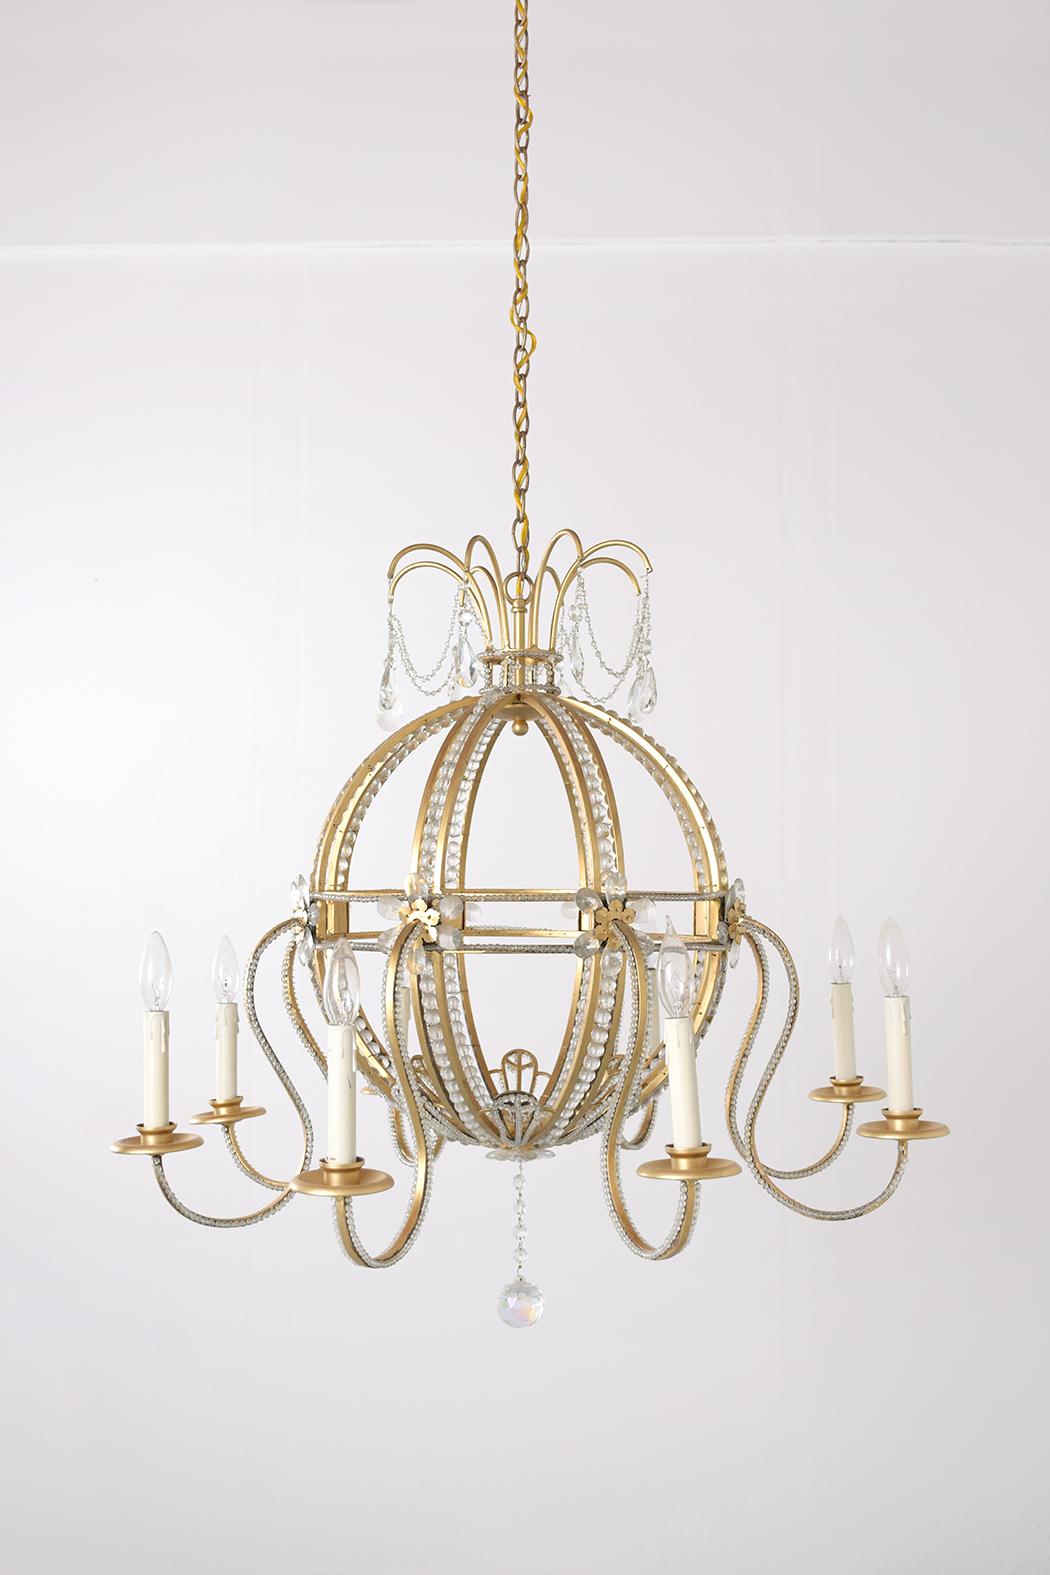 Illuminate your space with the grandeur of the past, brought to life in our extraordinary vintage brass crystal Hollywood Regency chandelier from the 1910s. This stunning piece, newly restored by our skilled team of craftsmen, is a blend of timeless